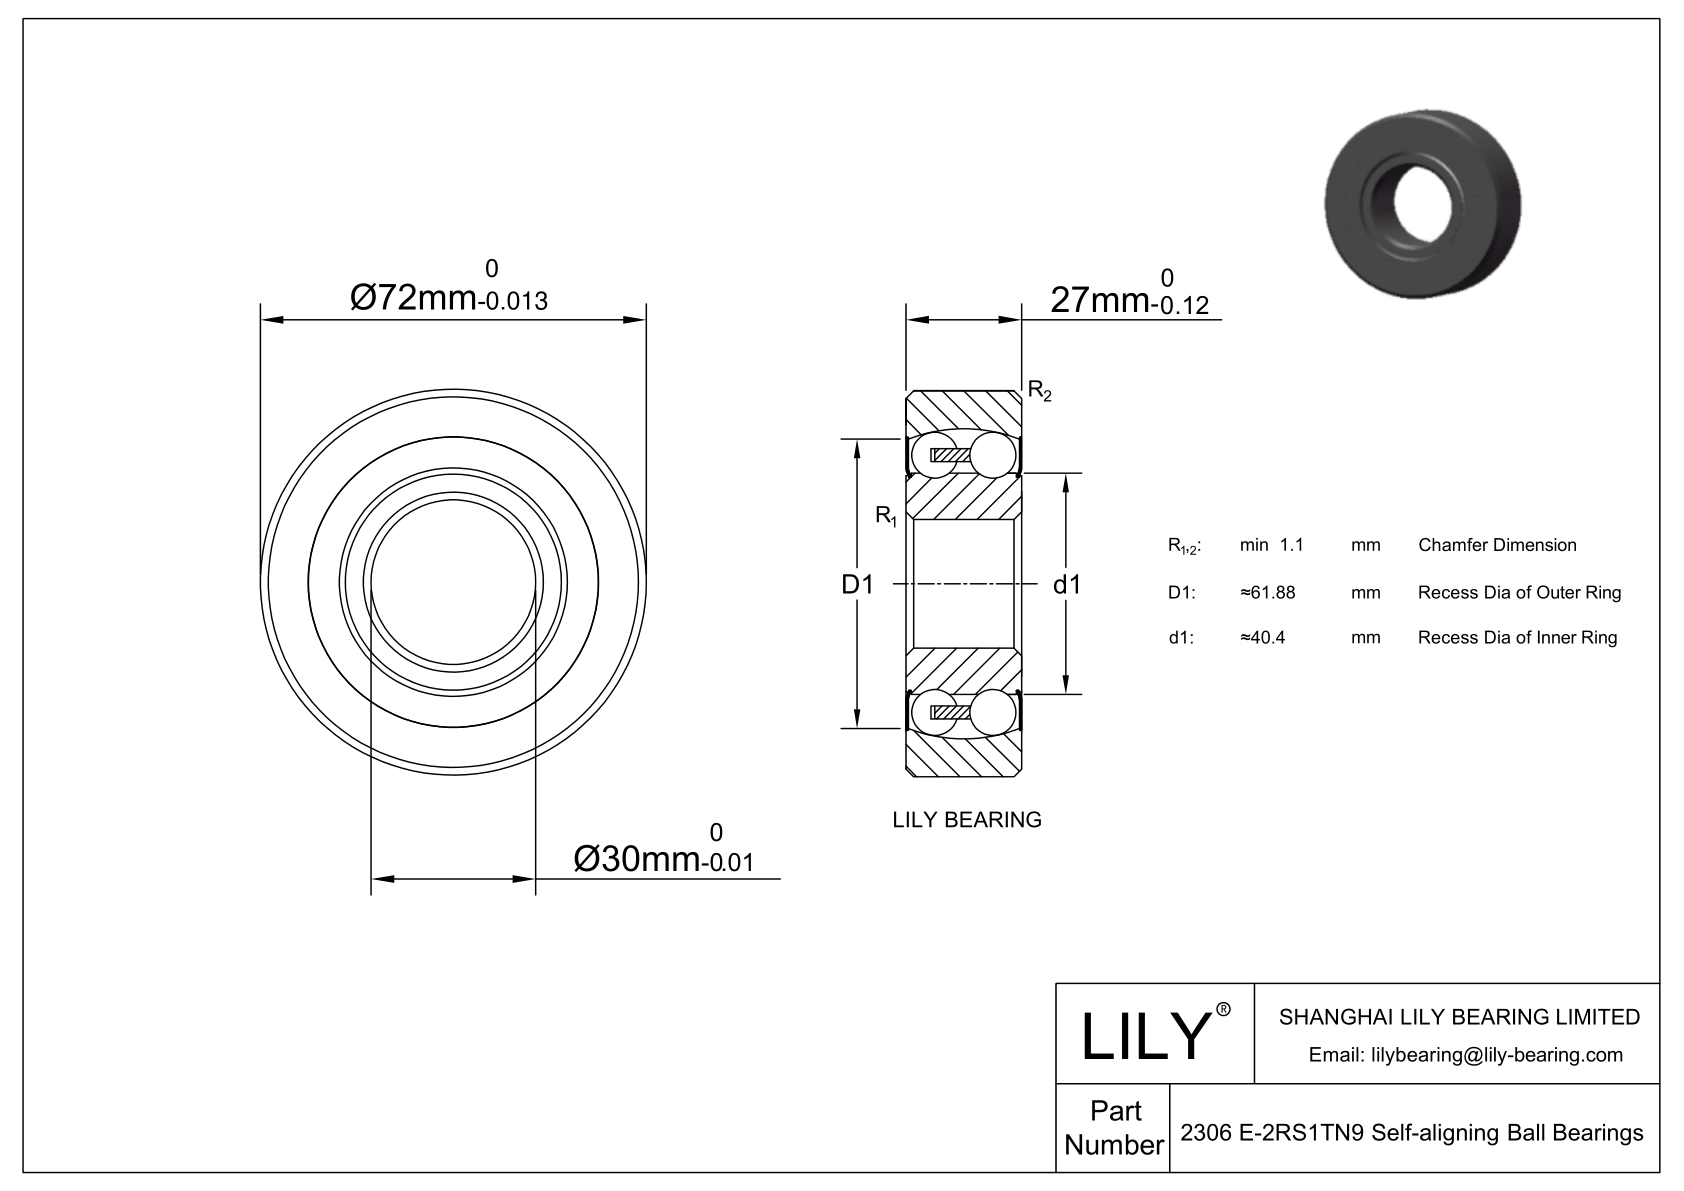 S2306 E-2RS1TN9 Stainless Steel Self Aligning Ball Bearings cad drawing